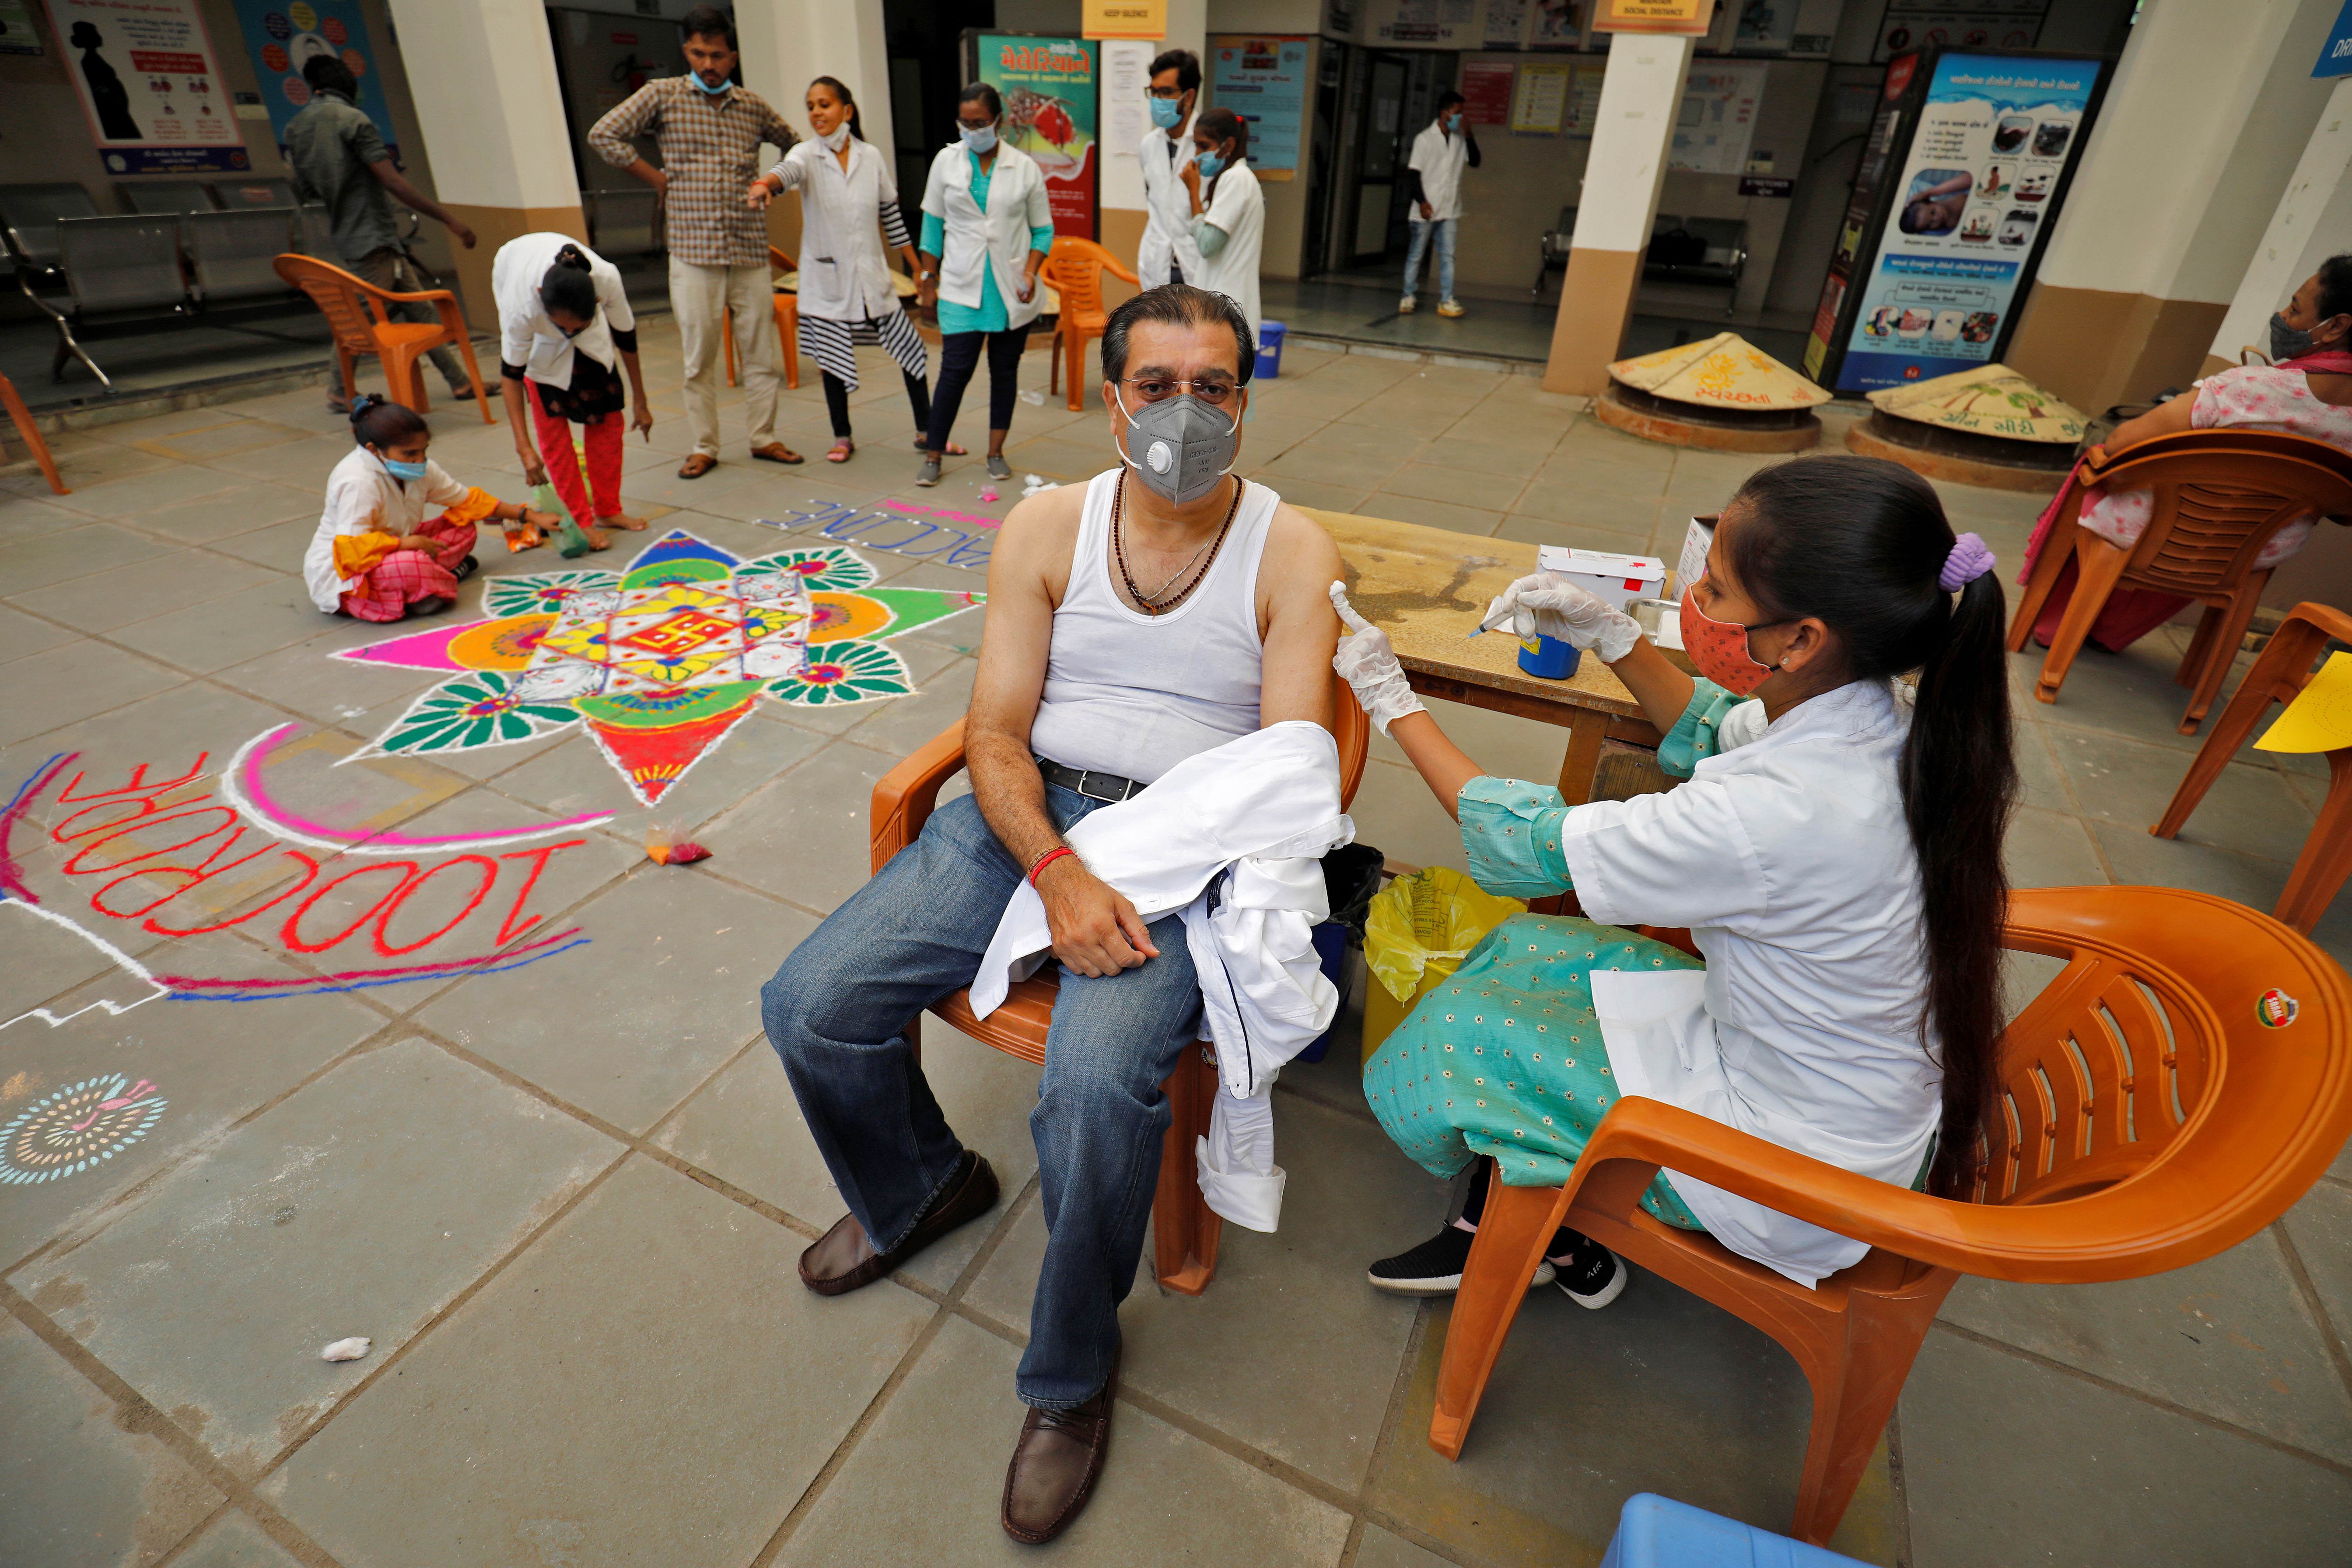 A healthcare worker gives a dose of the COVISHIELD vaccine against the coronavirus disease (COVID-19), manufactured by Serum Institute of India, to a man as others decorate the vaccination centre to celebrate the milestone of administering one billion COVID-19 vaccine doses, in Ahmedabad, India, October 21, 2021. REUTERS/Amit Dave